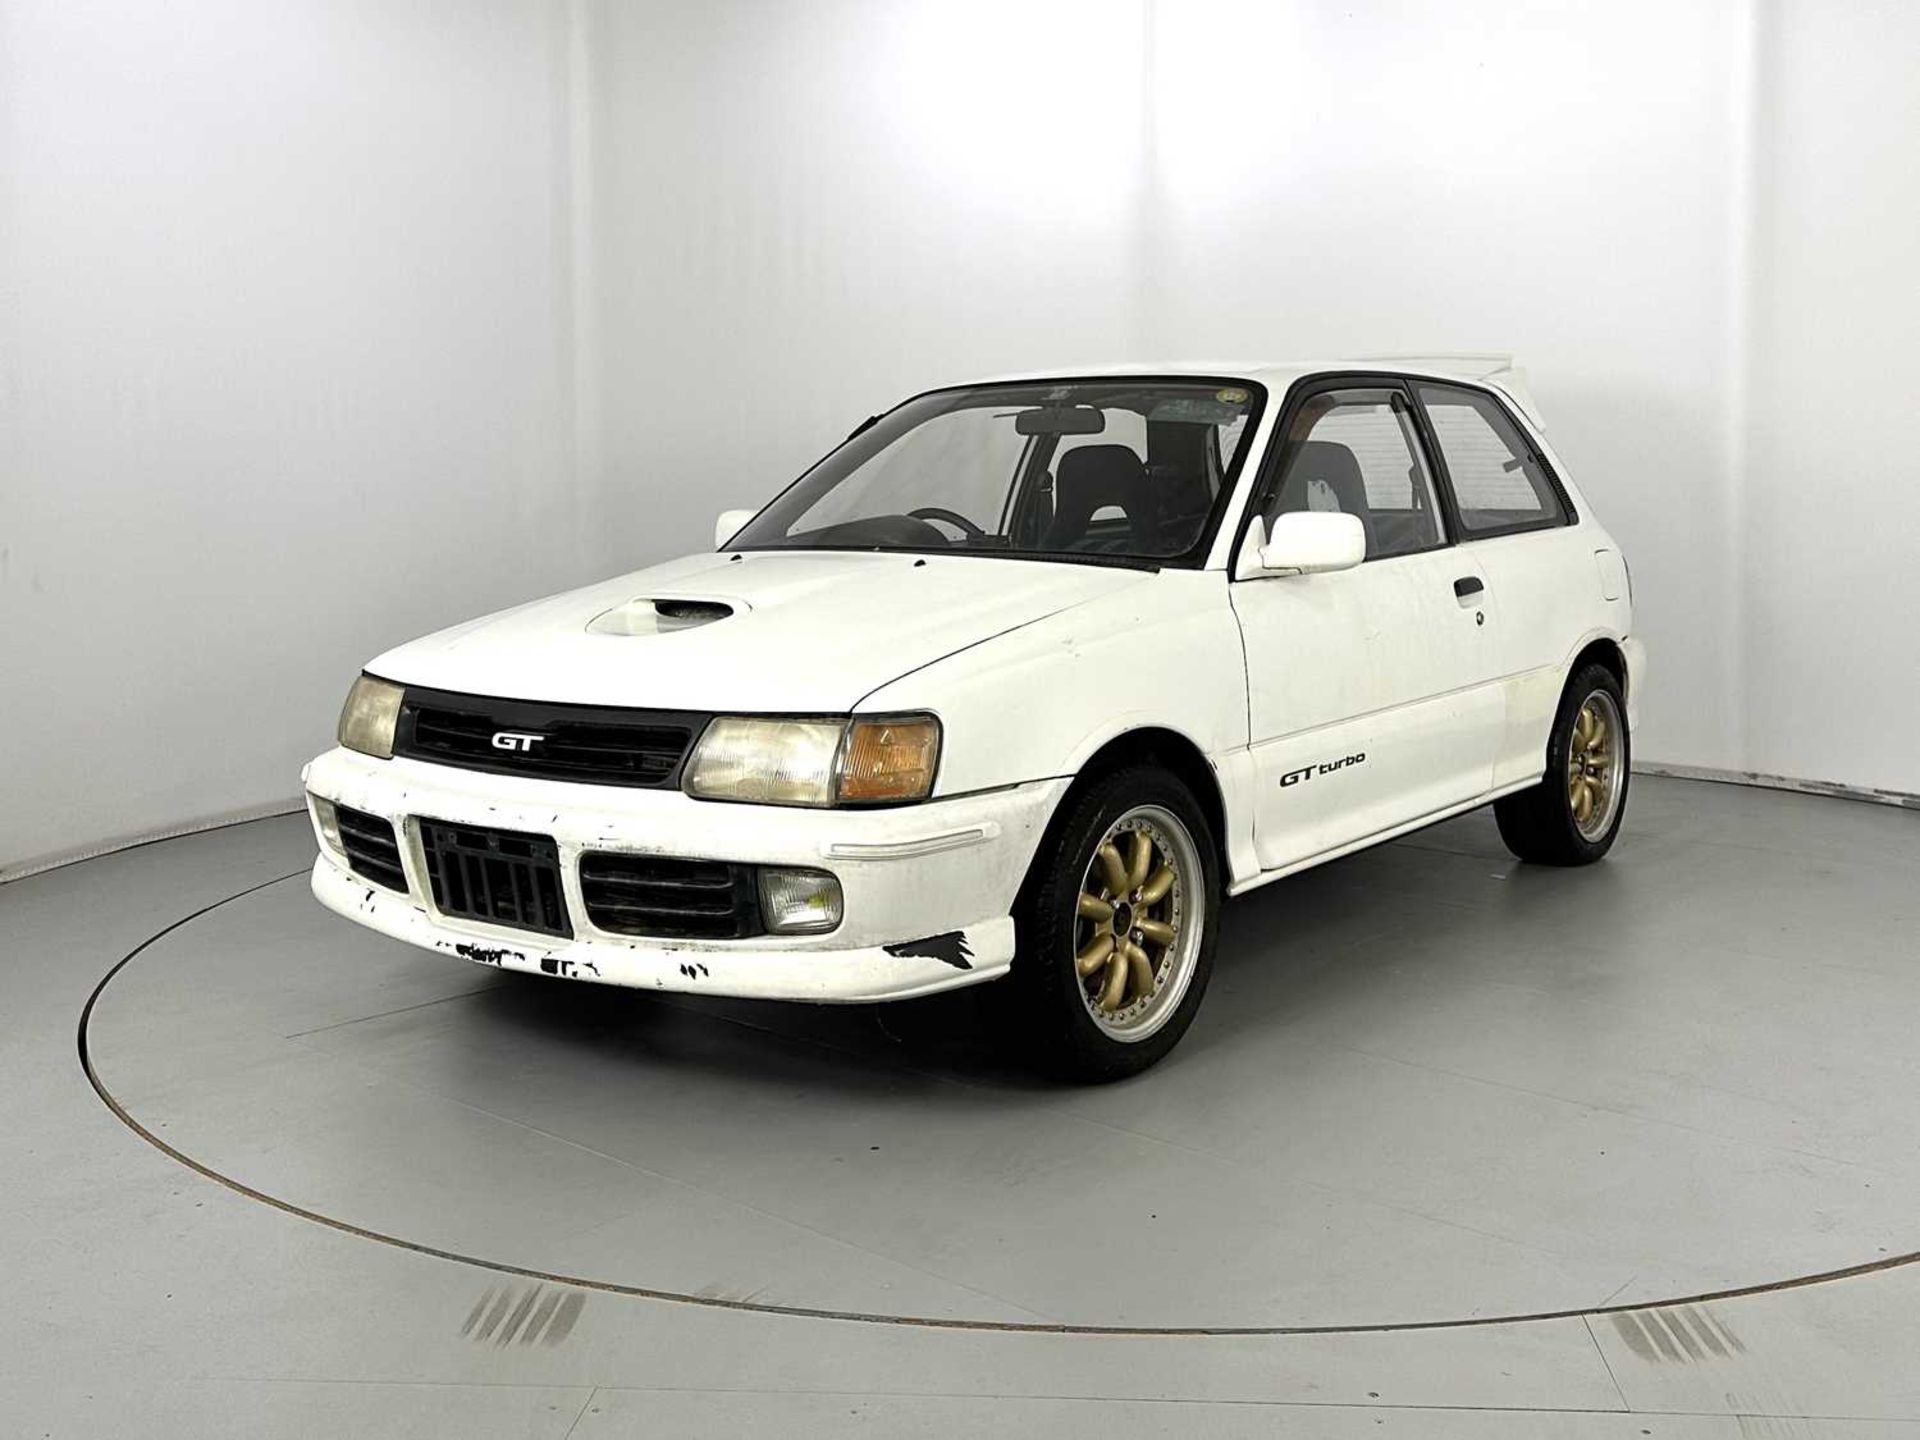 1990 Toyota Starlet GT Turbo - Image 3 of 29